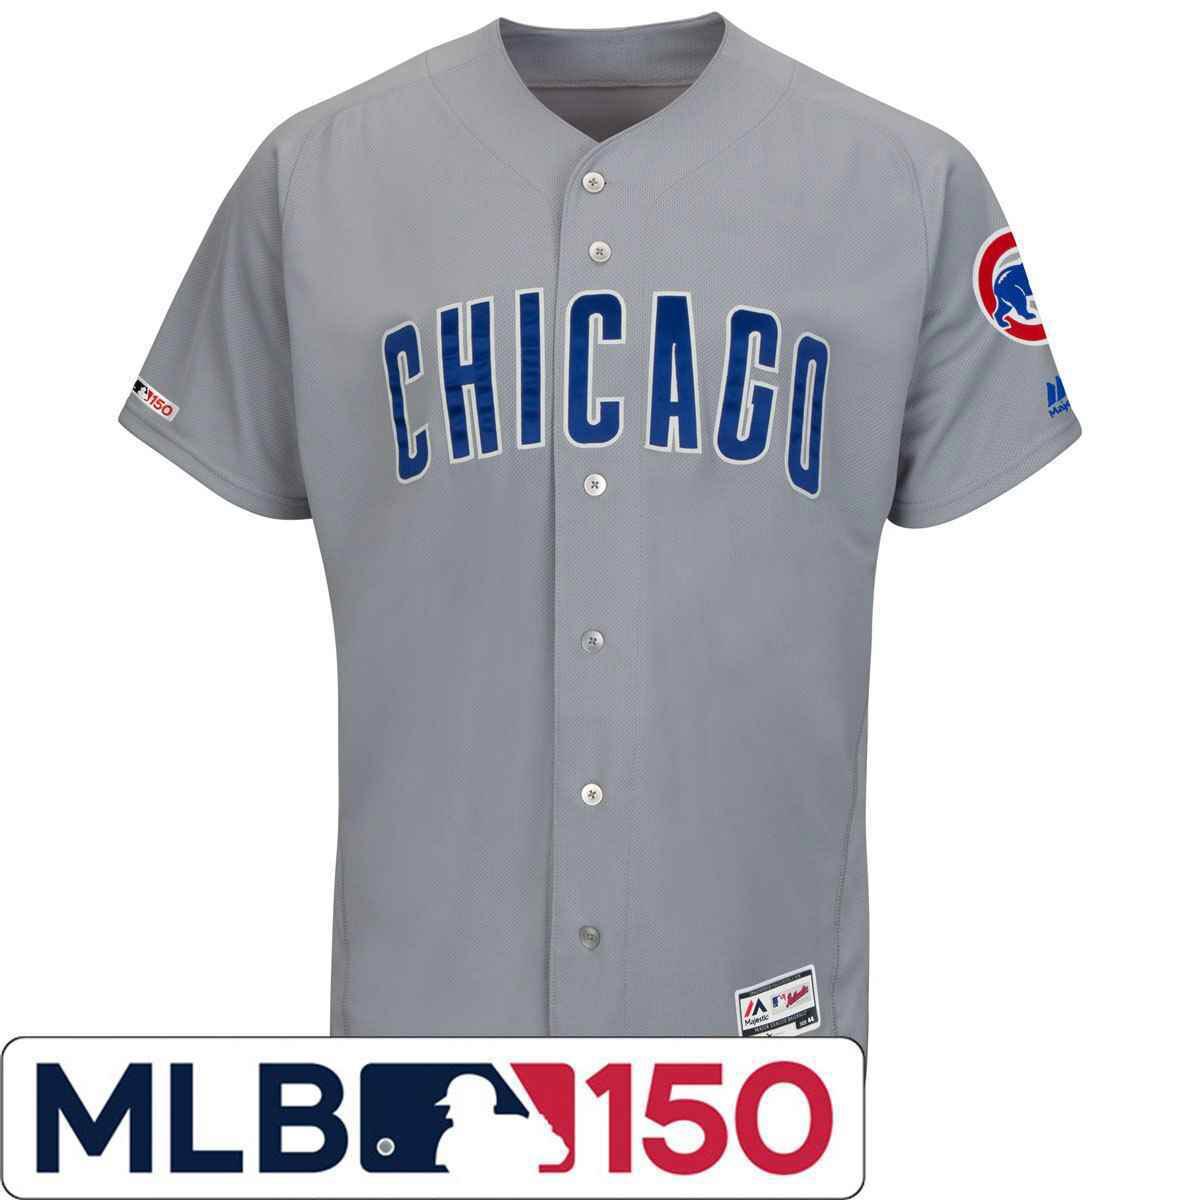 Majestic Chicago Cubs Authentic Road Baseball Jersey